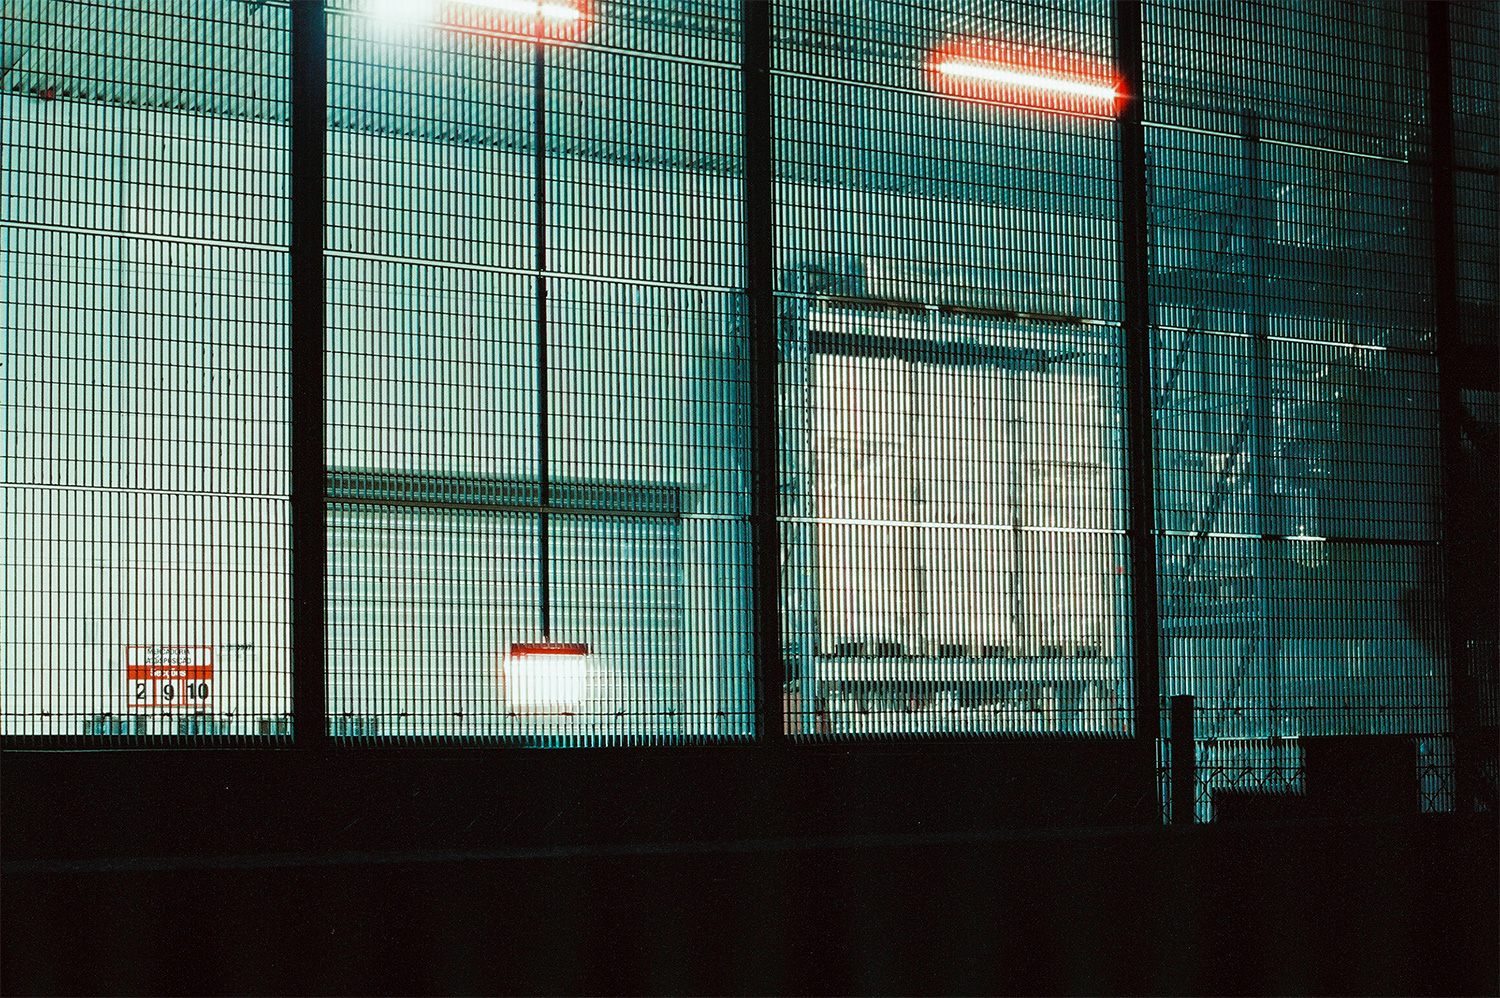 Analog photo of the inside of warehouse through a fence at night.